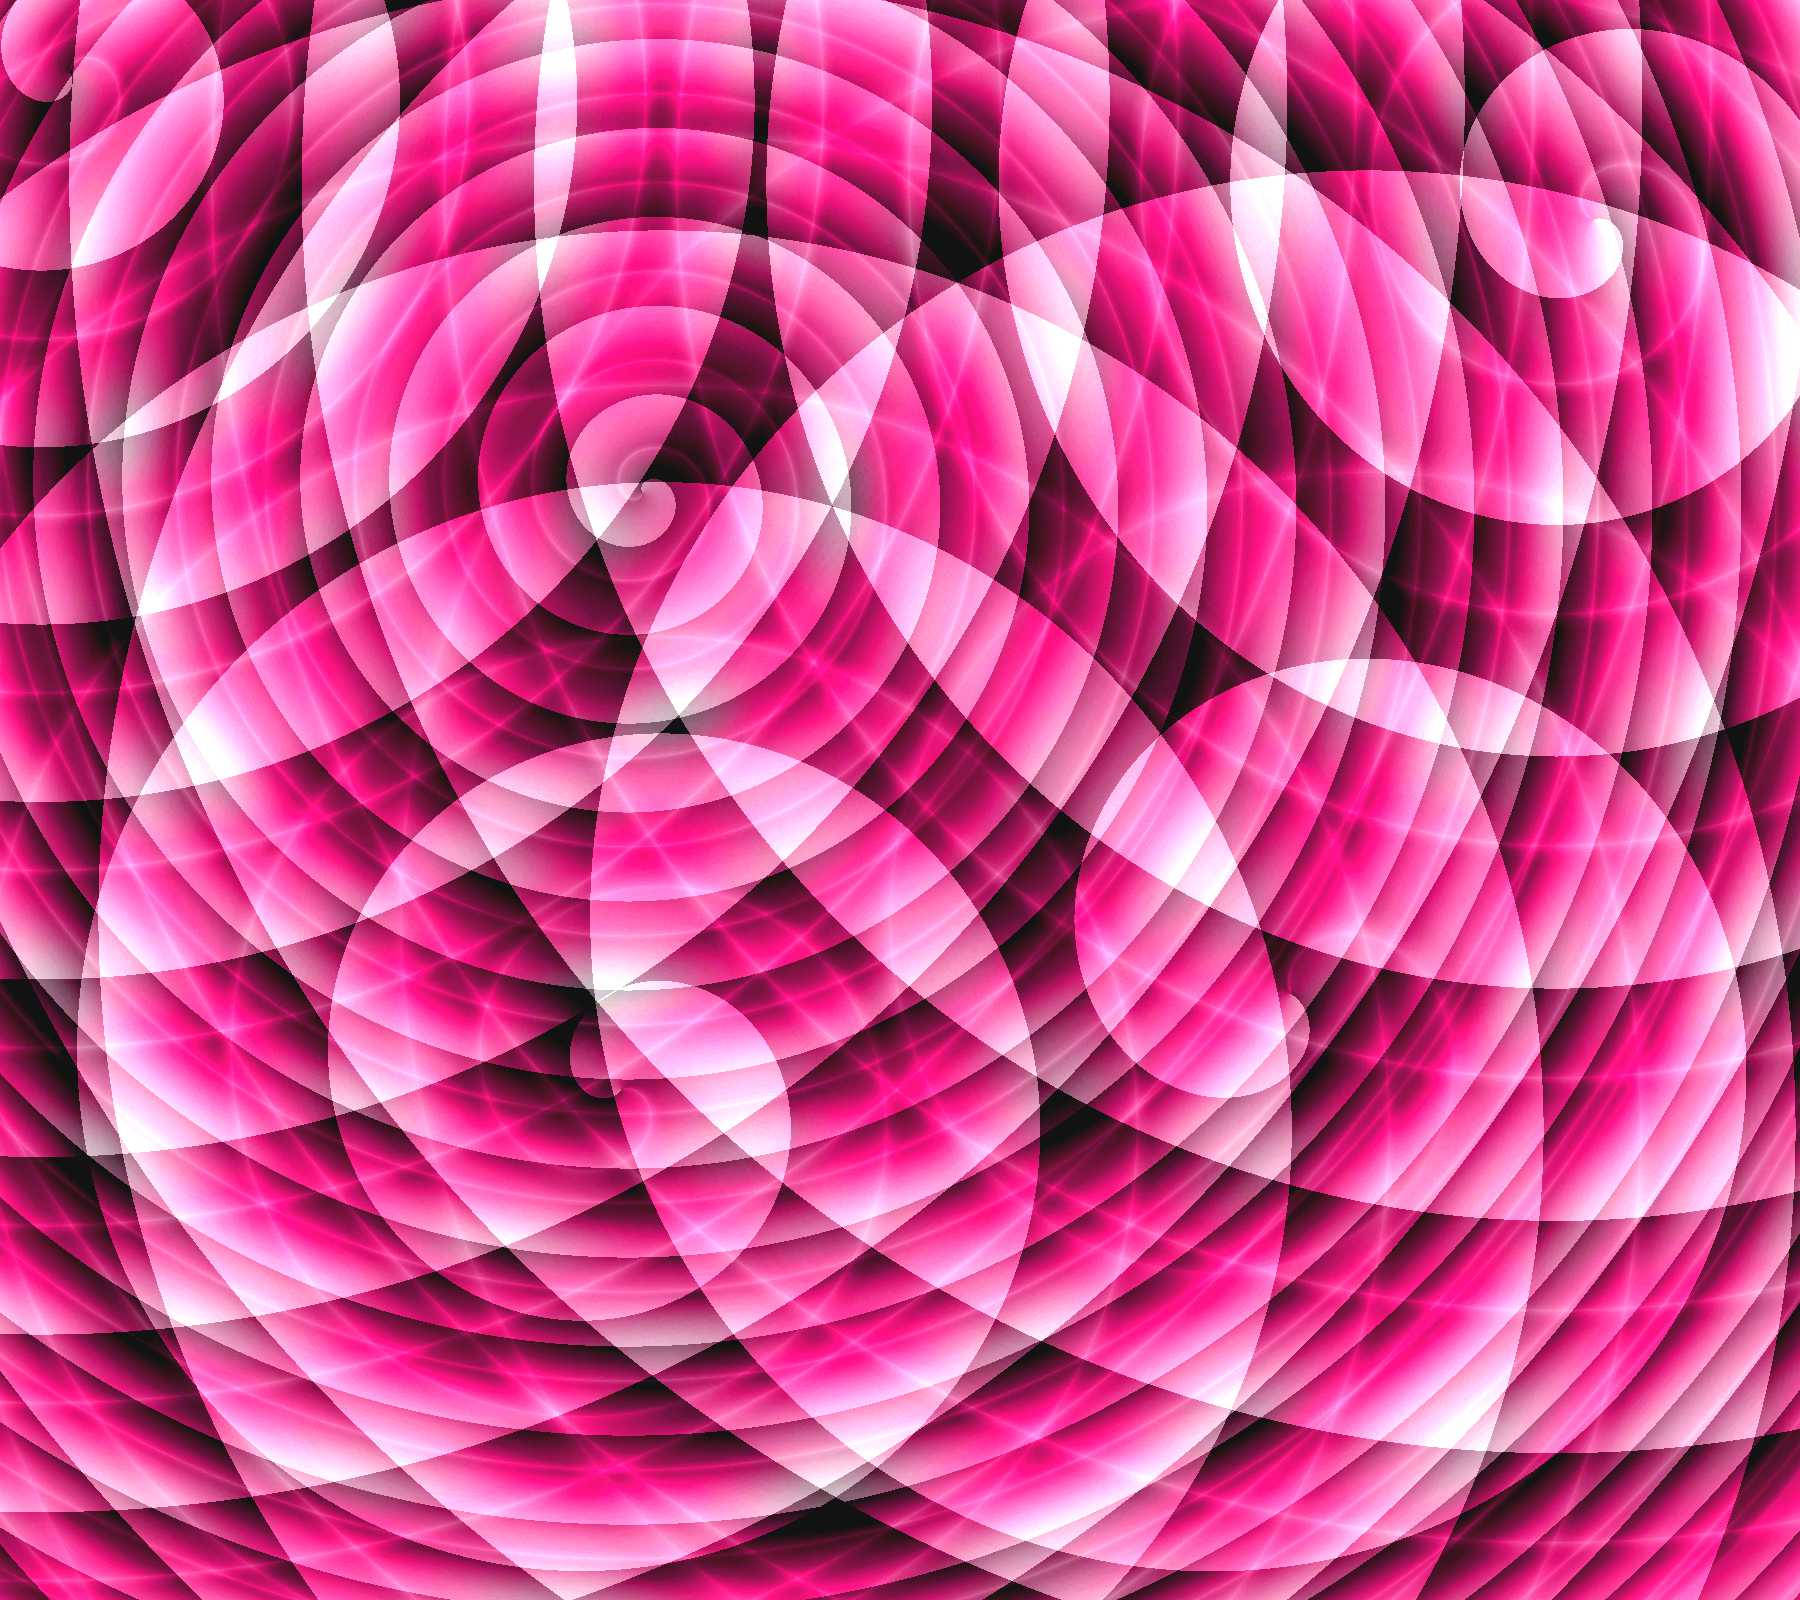 Hot Pink Spiral Designs Black And White Background